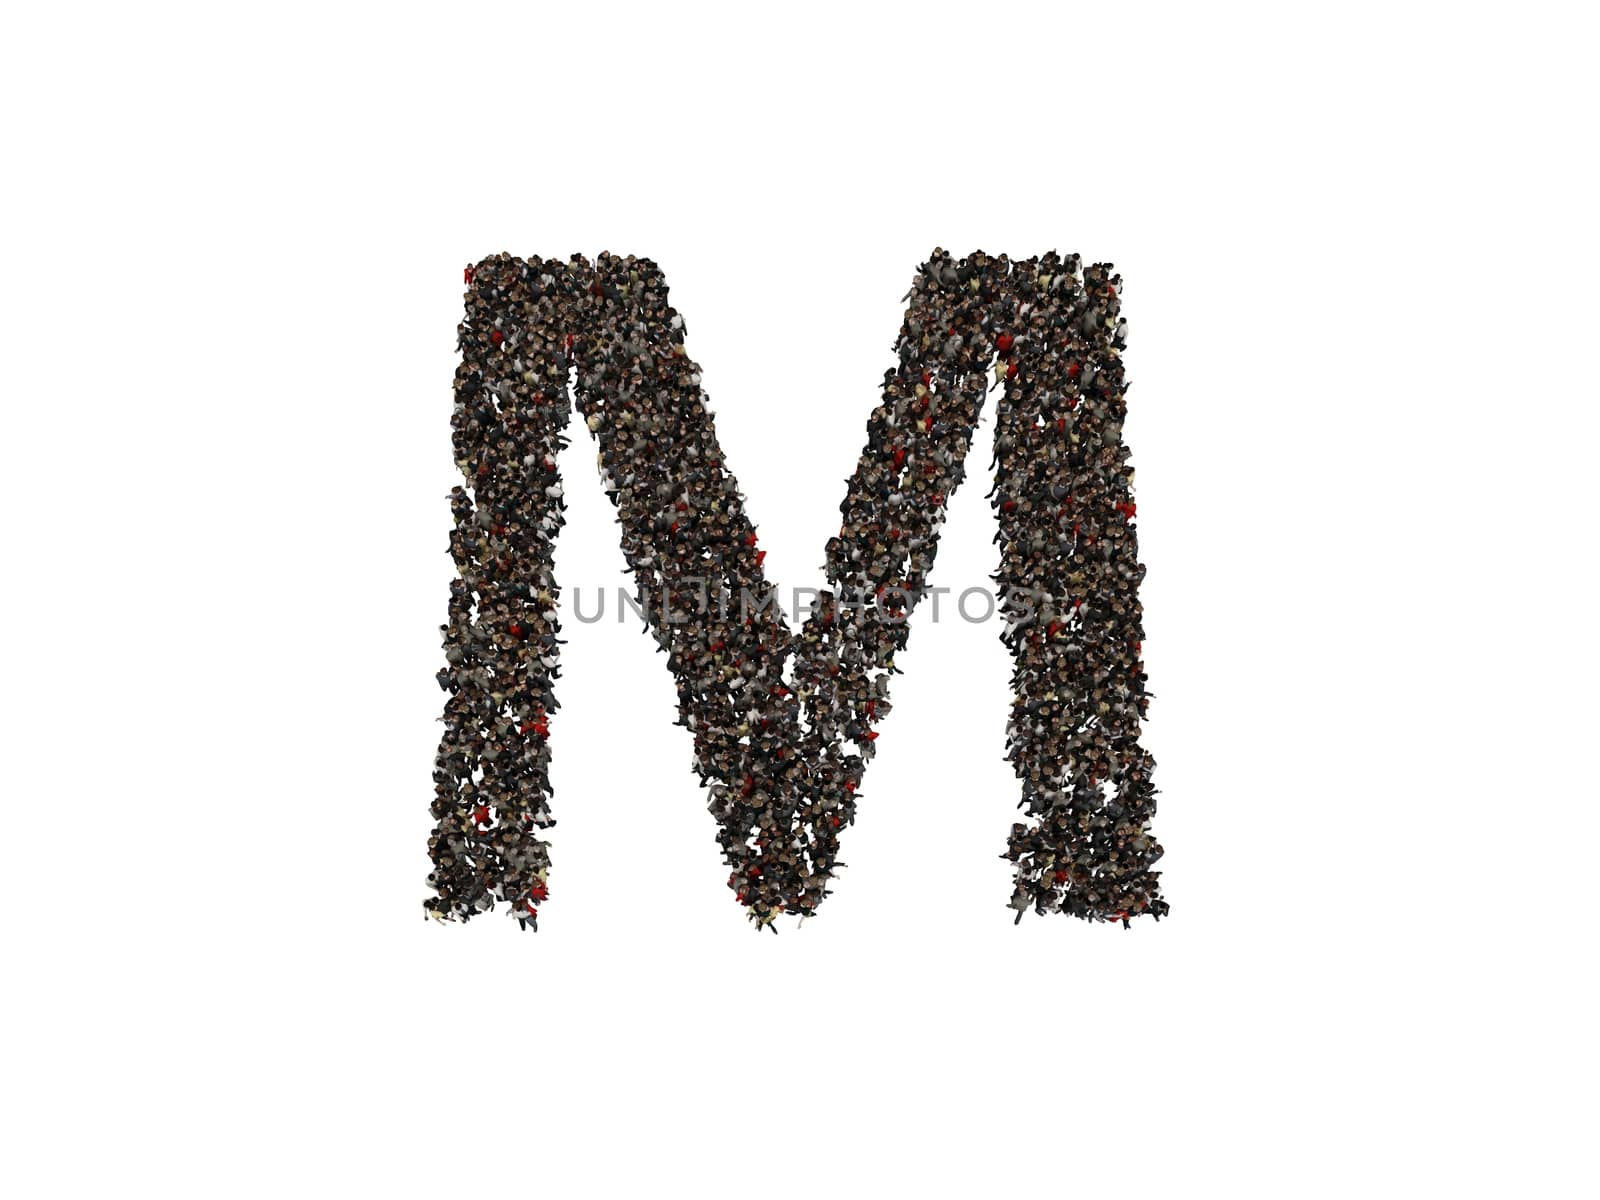 3d characters forming the letter M isolated on a white background seen from above